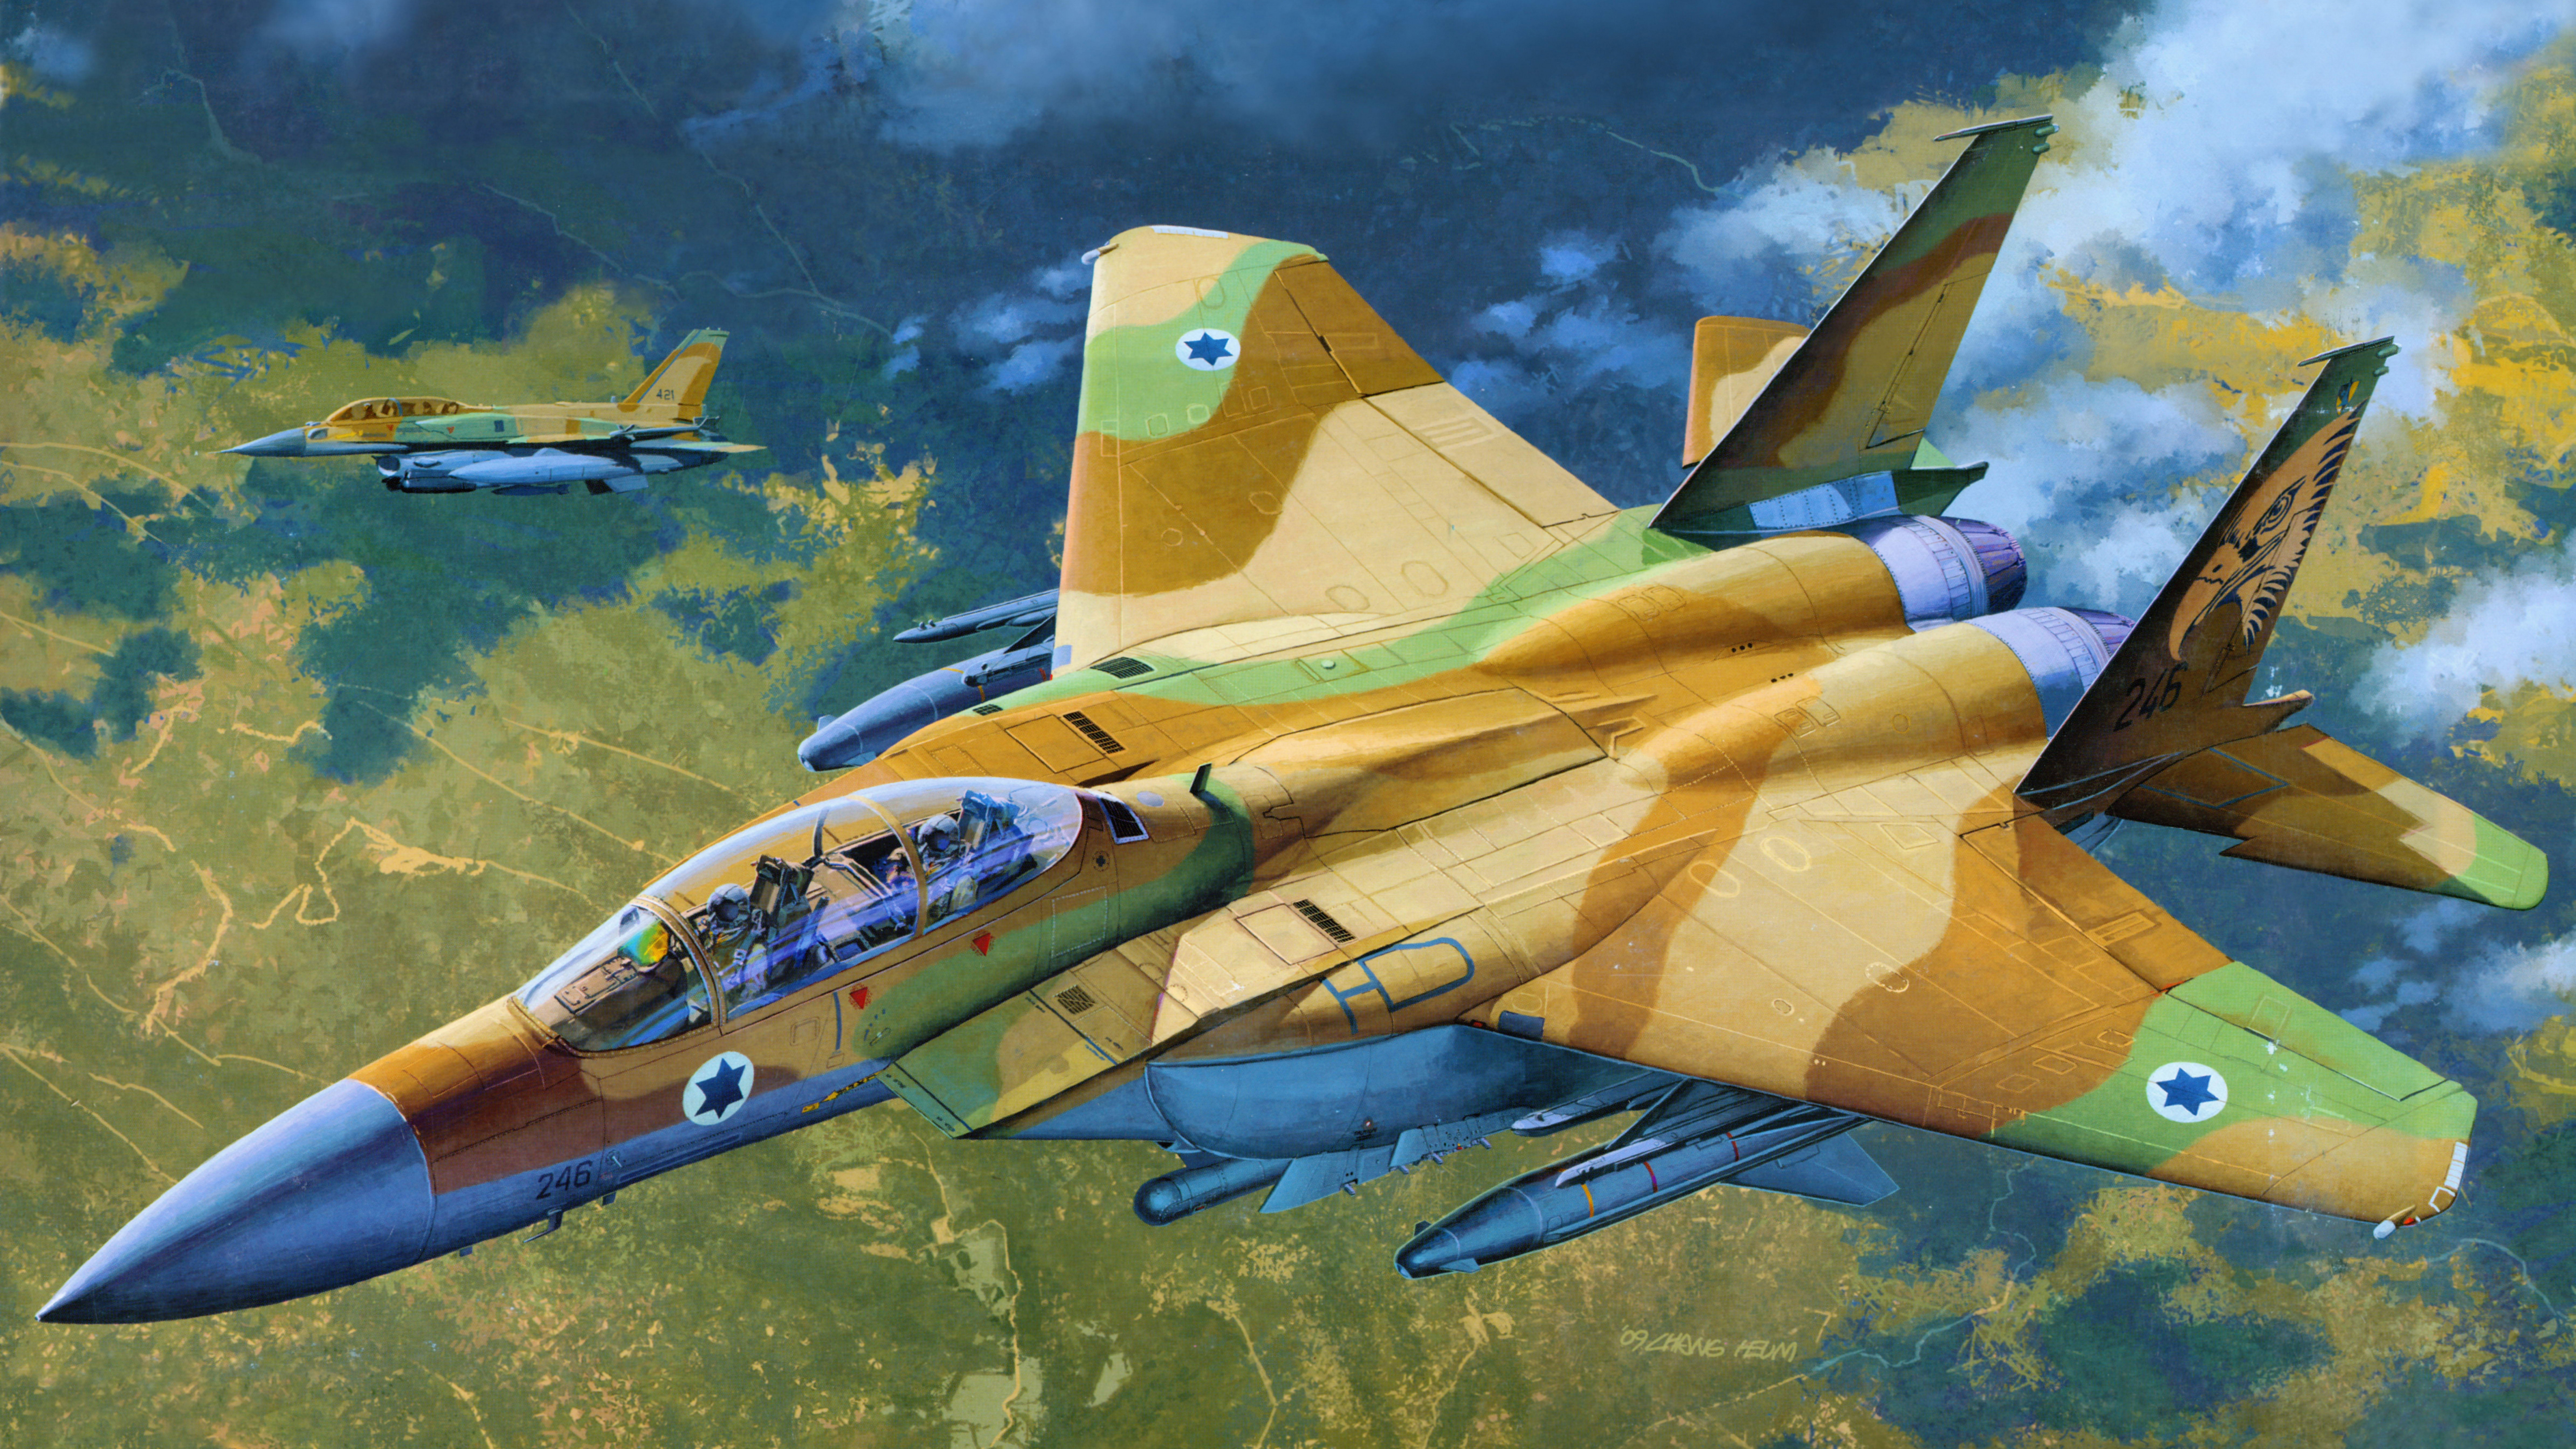 Yellow and Blue Jet Plane. Wallpaper in 7680x4320 Resolution